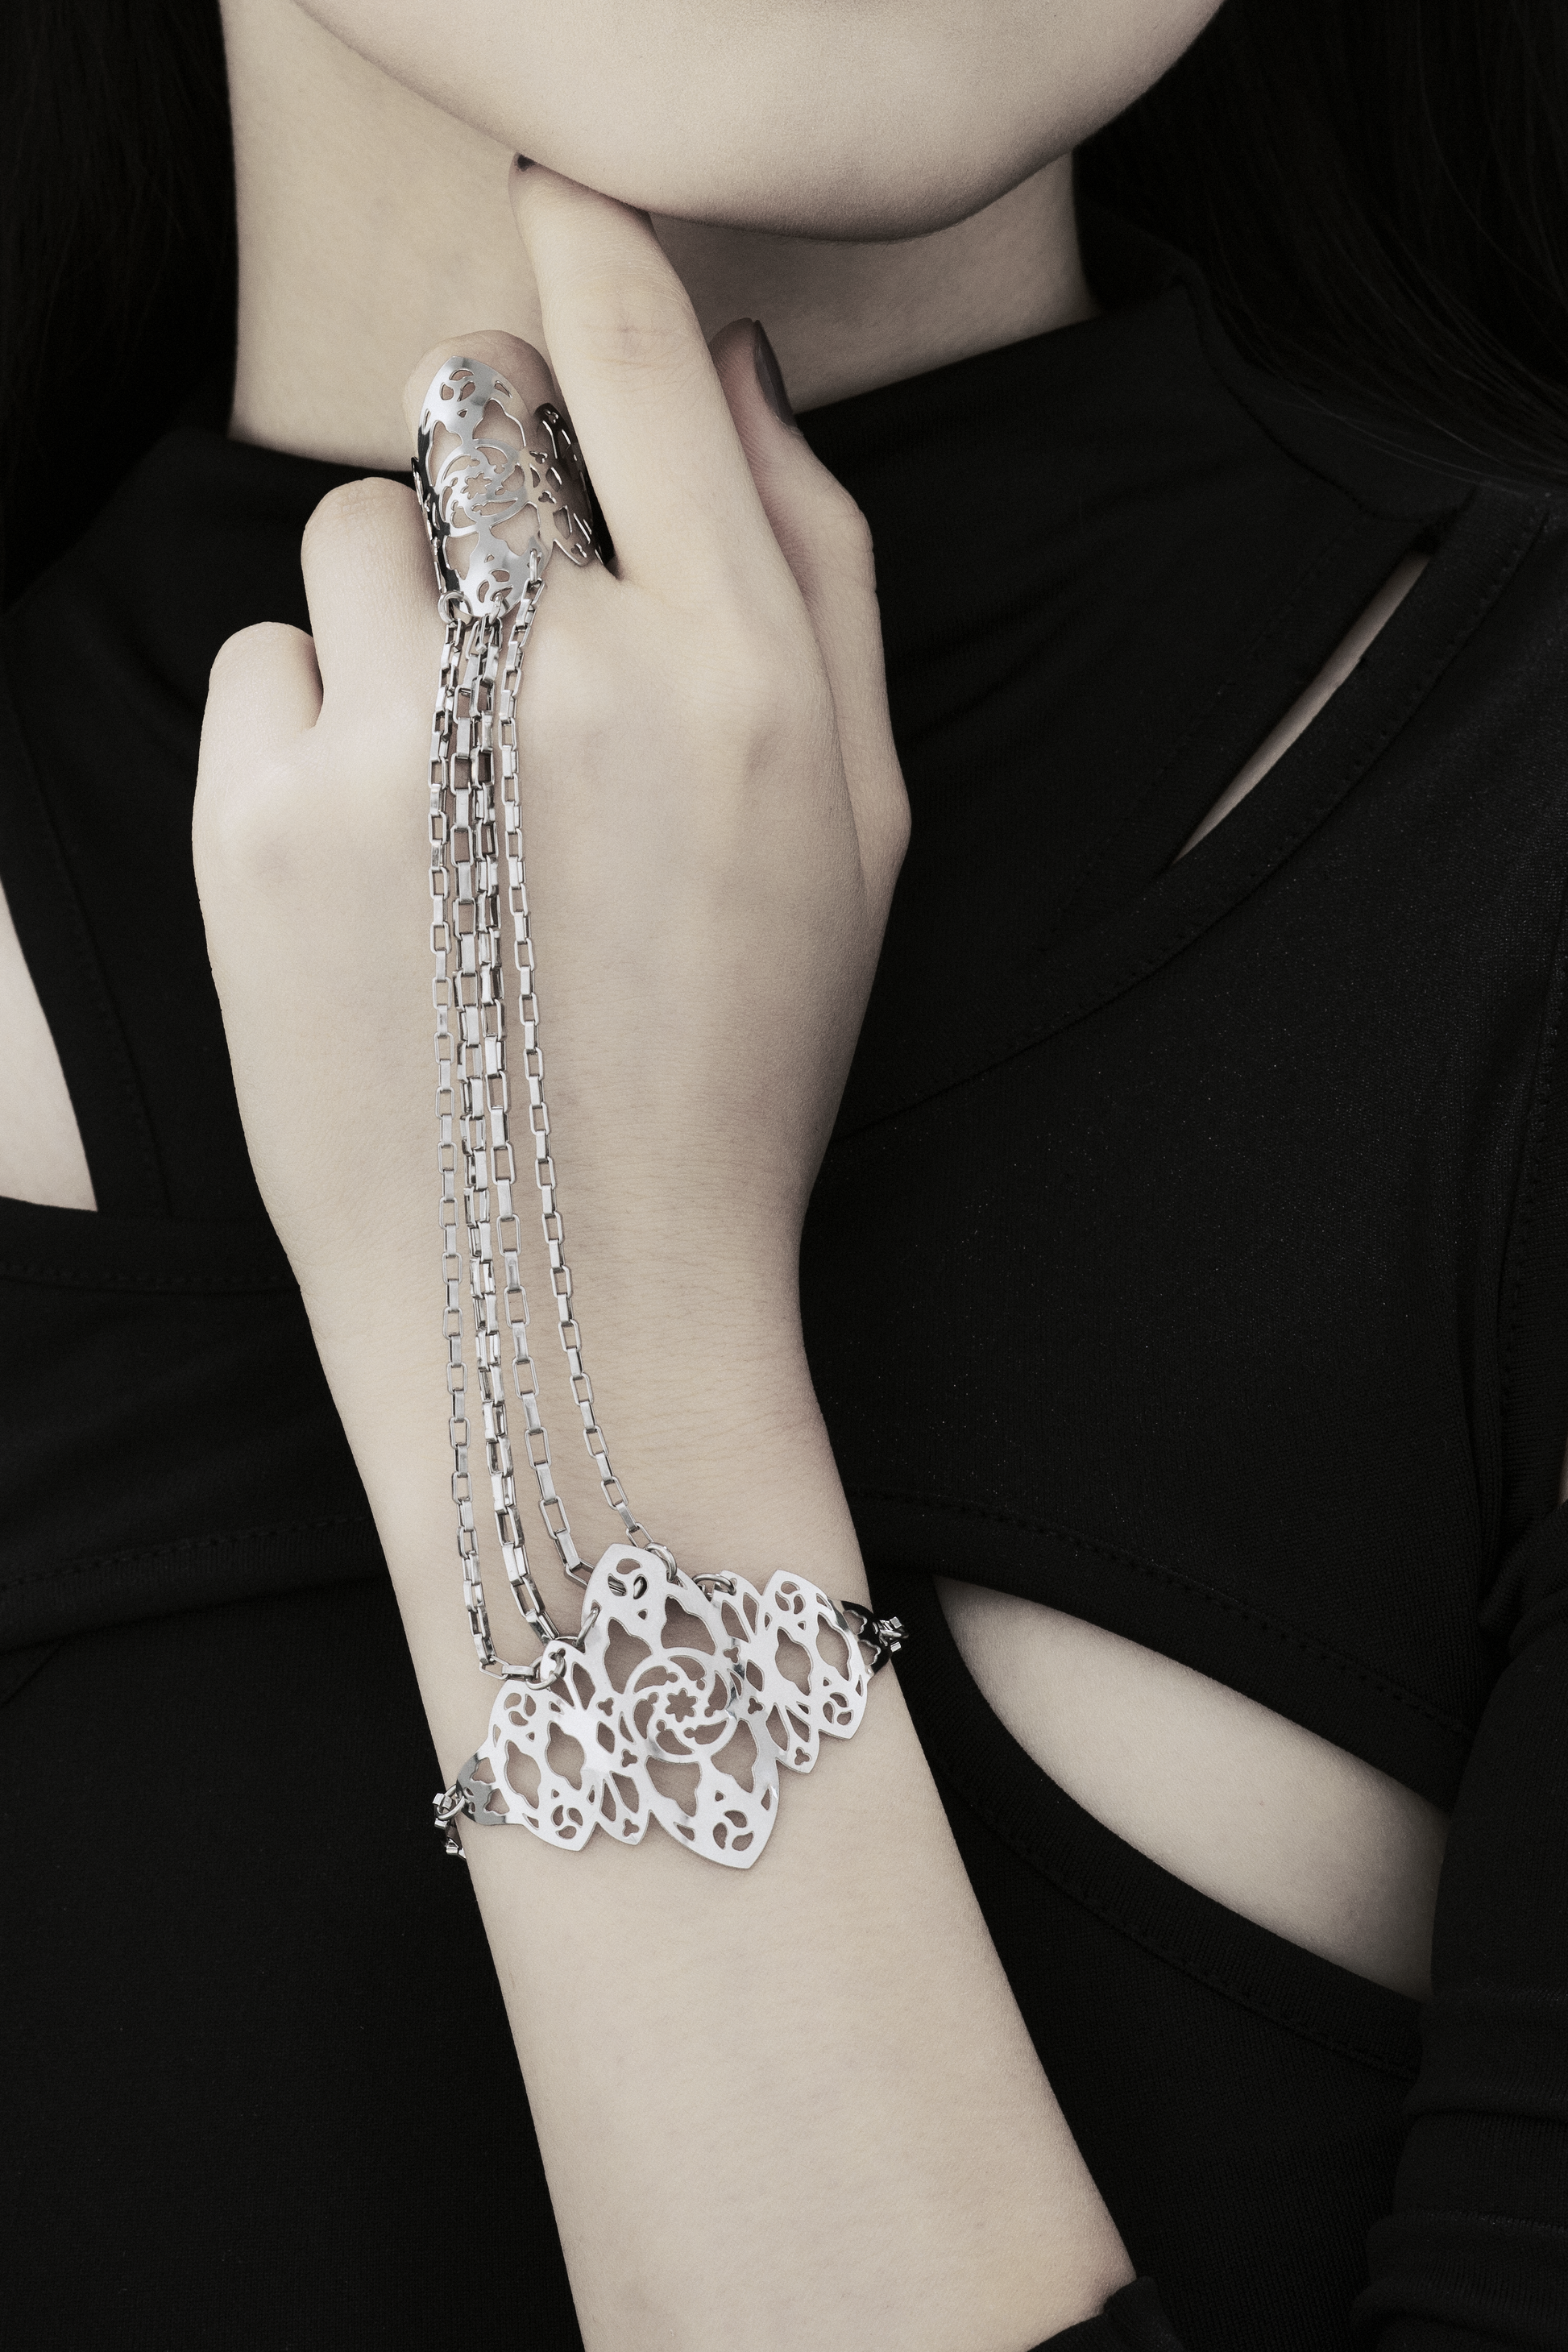 The photo captures a hand elegantly adorned with a Myril Jewels hand chain, featuring intricate gothic arches inspired filigree that cascades down the wrist. It's a perfect blend of neo-gothic style and dark romance, ideal for those who appreciate a touch of avant-garde in their everyday wear or for making a statement at a gothic-chic event.